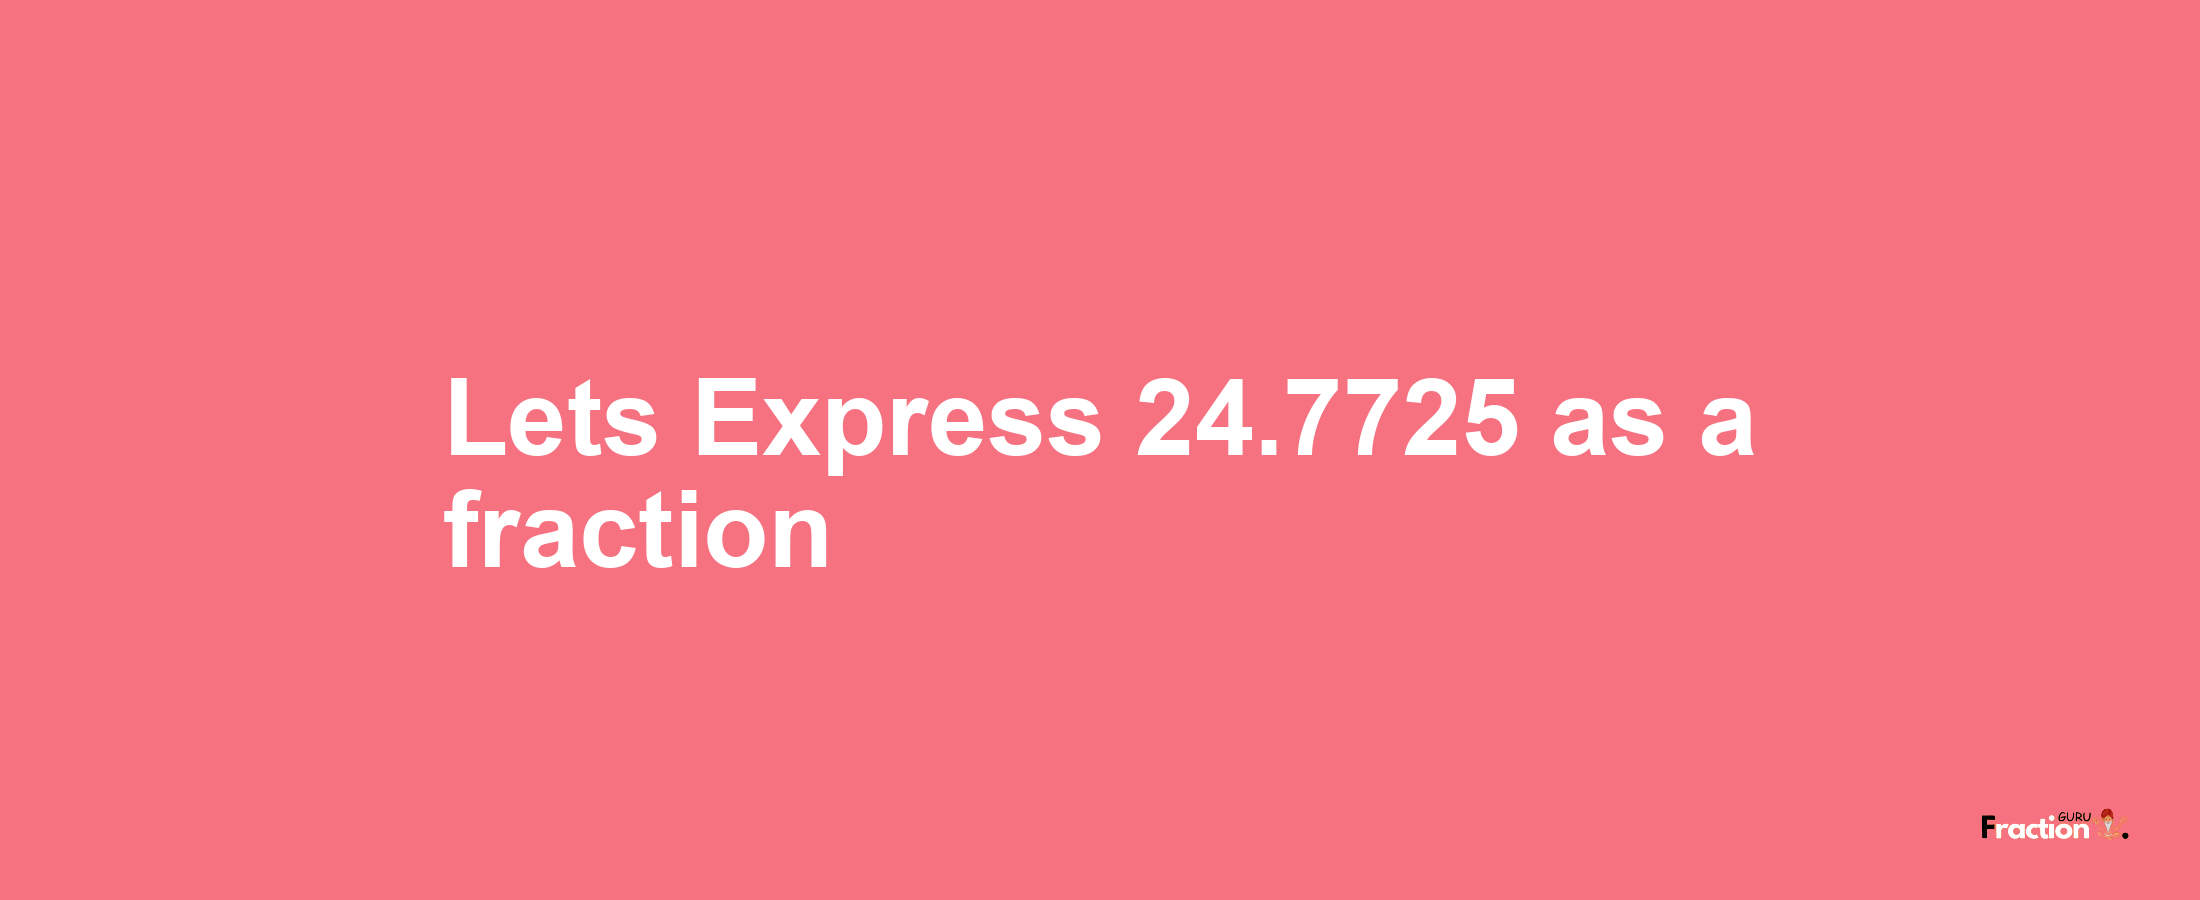 Lets Express 24.7725 as afraction